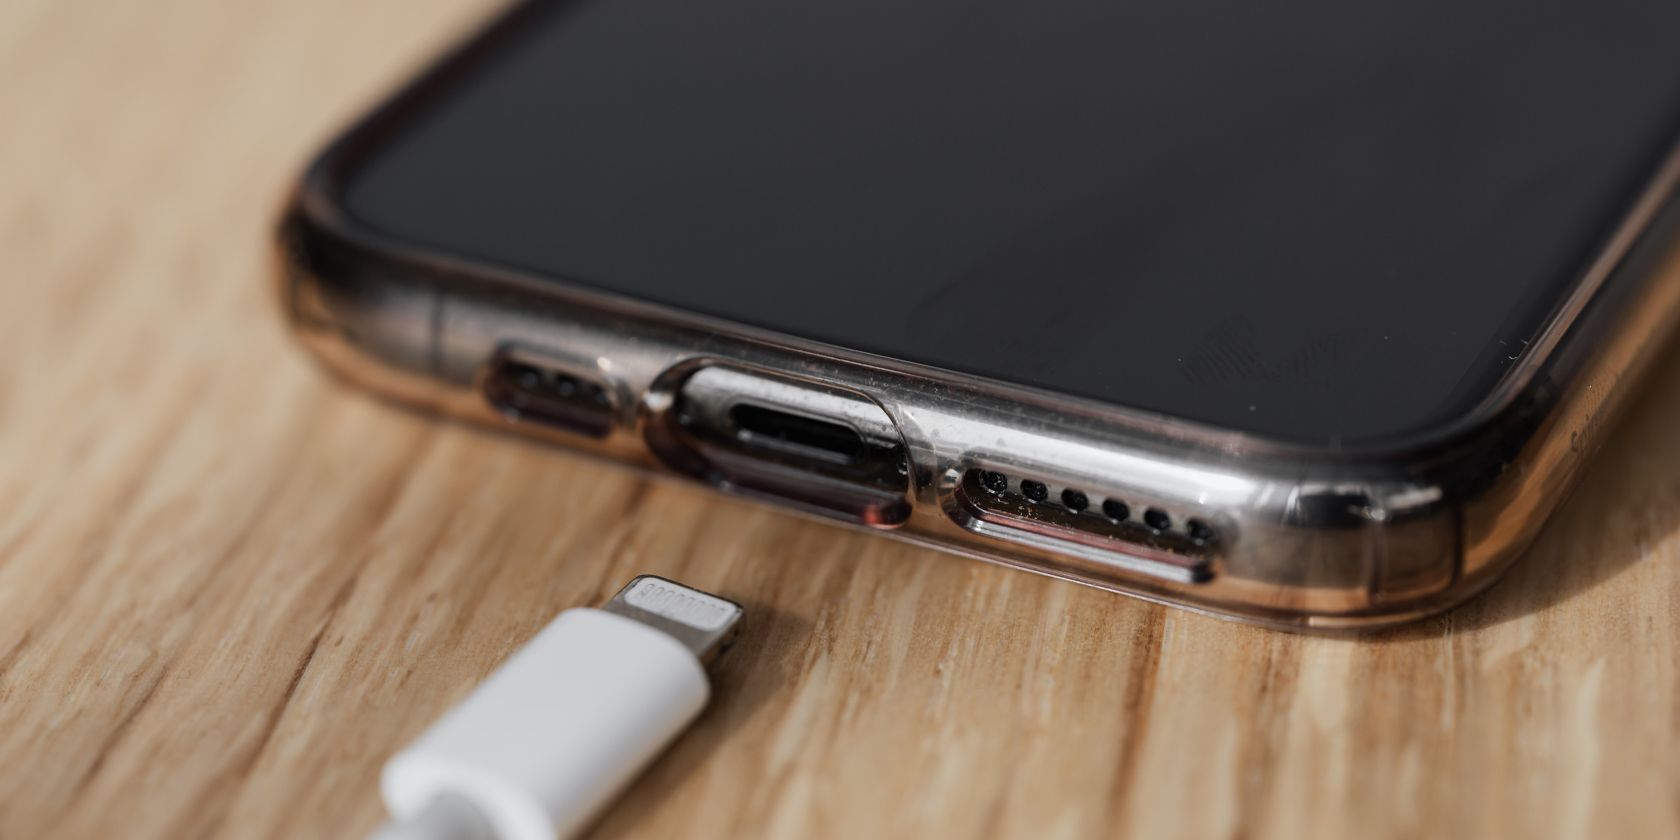 The charging port of an iPhone together with a charger on the table